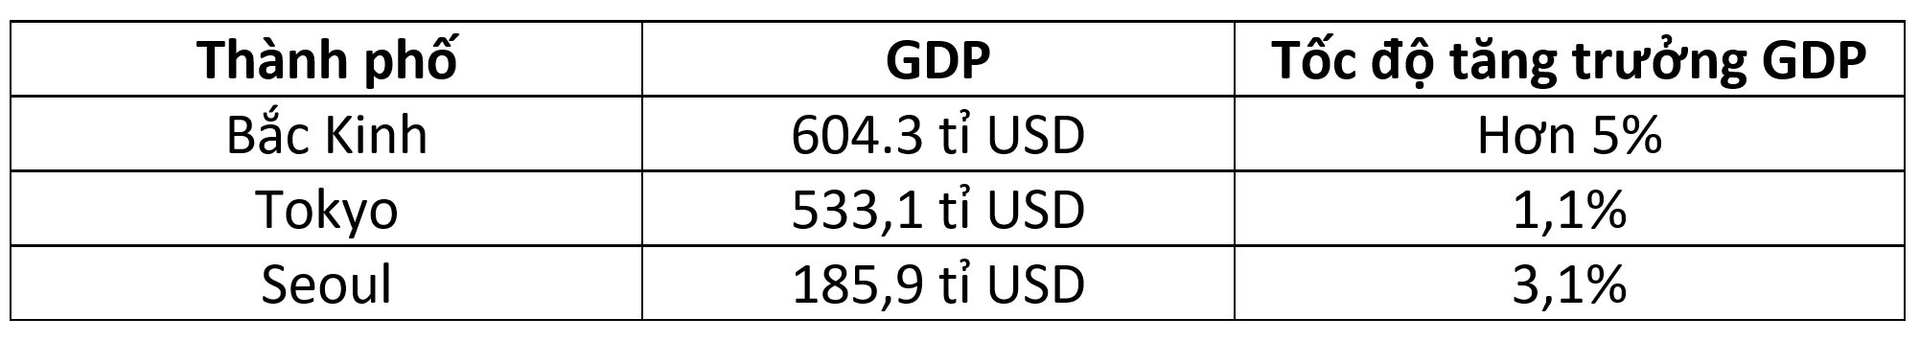 gdp.png